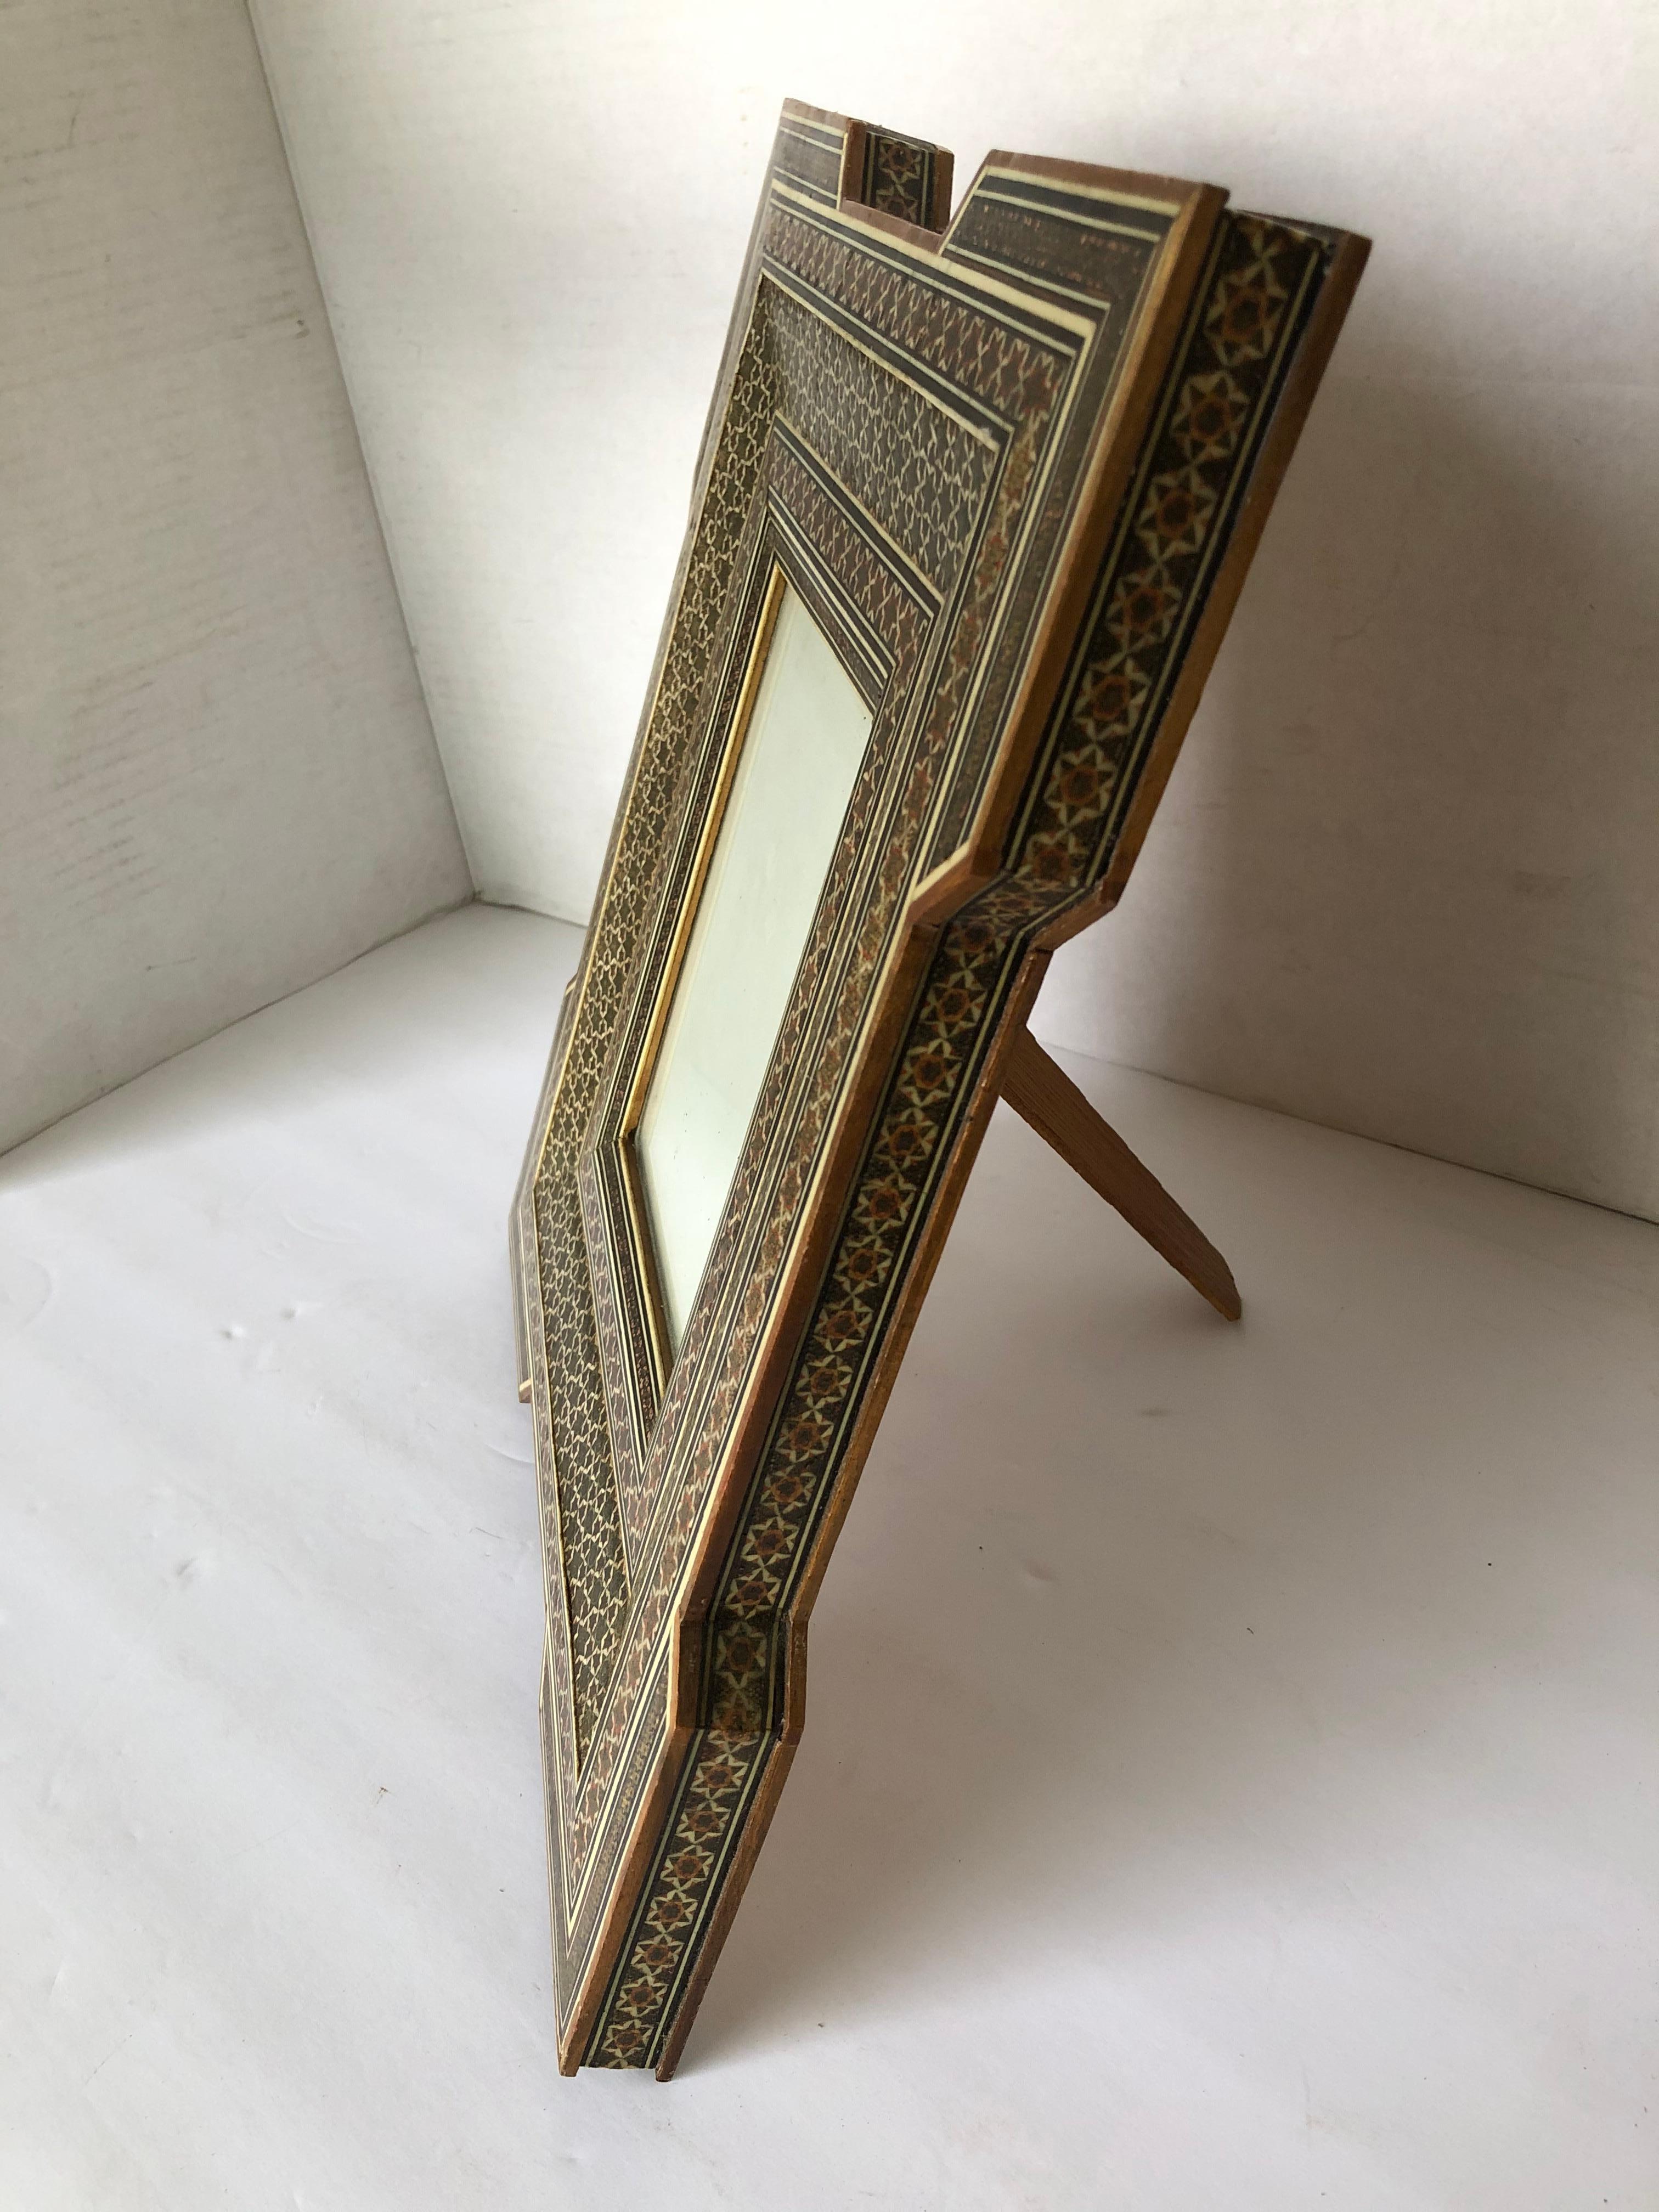 Israeli Antique Islamic Wood Picture Frame with Brass, Bone Wood Inlaid Design